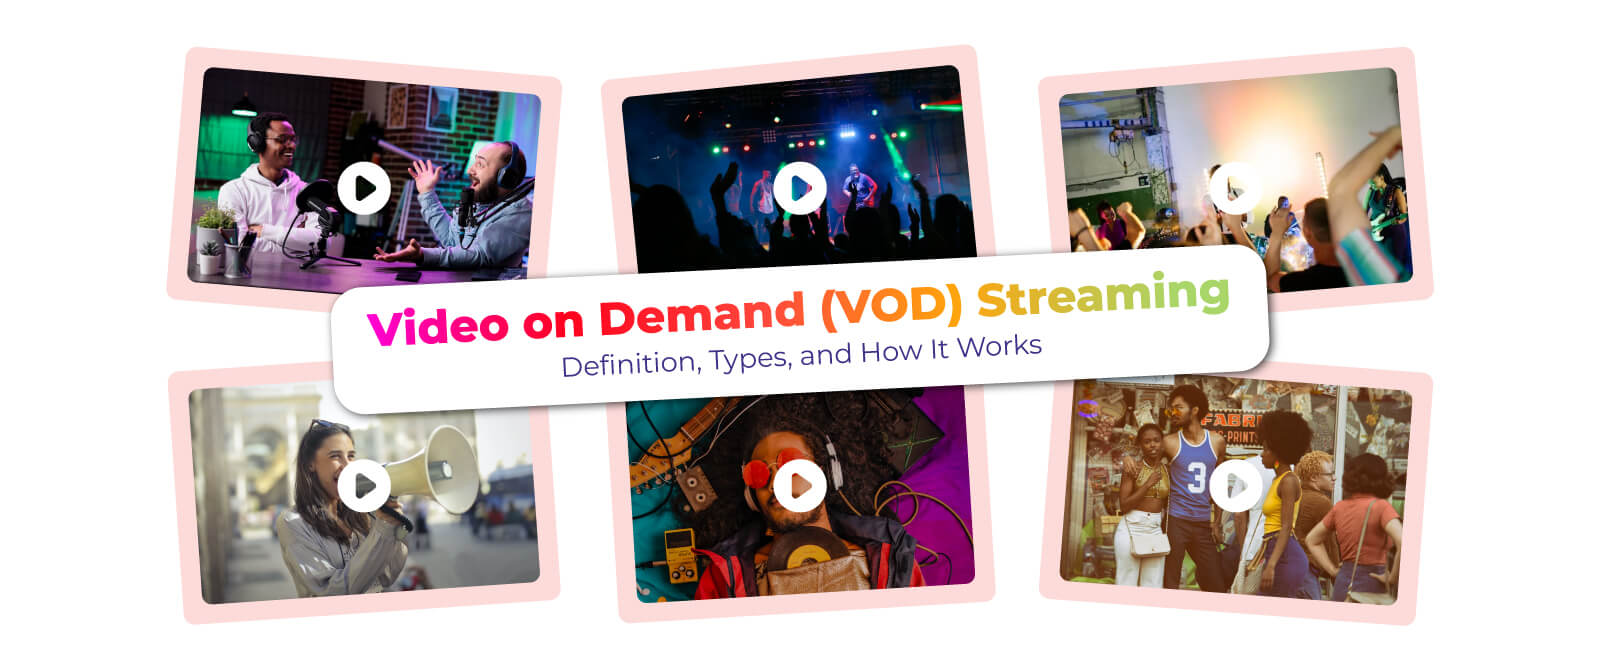 Video on Demand (VOD) Streaming: Definition, Types, and How It Works